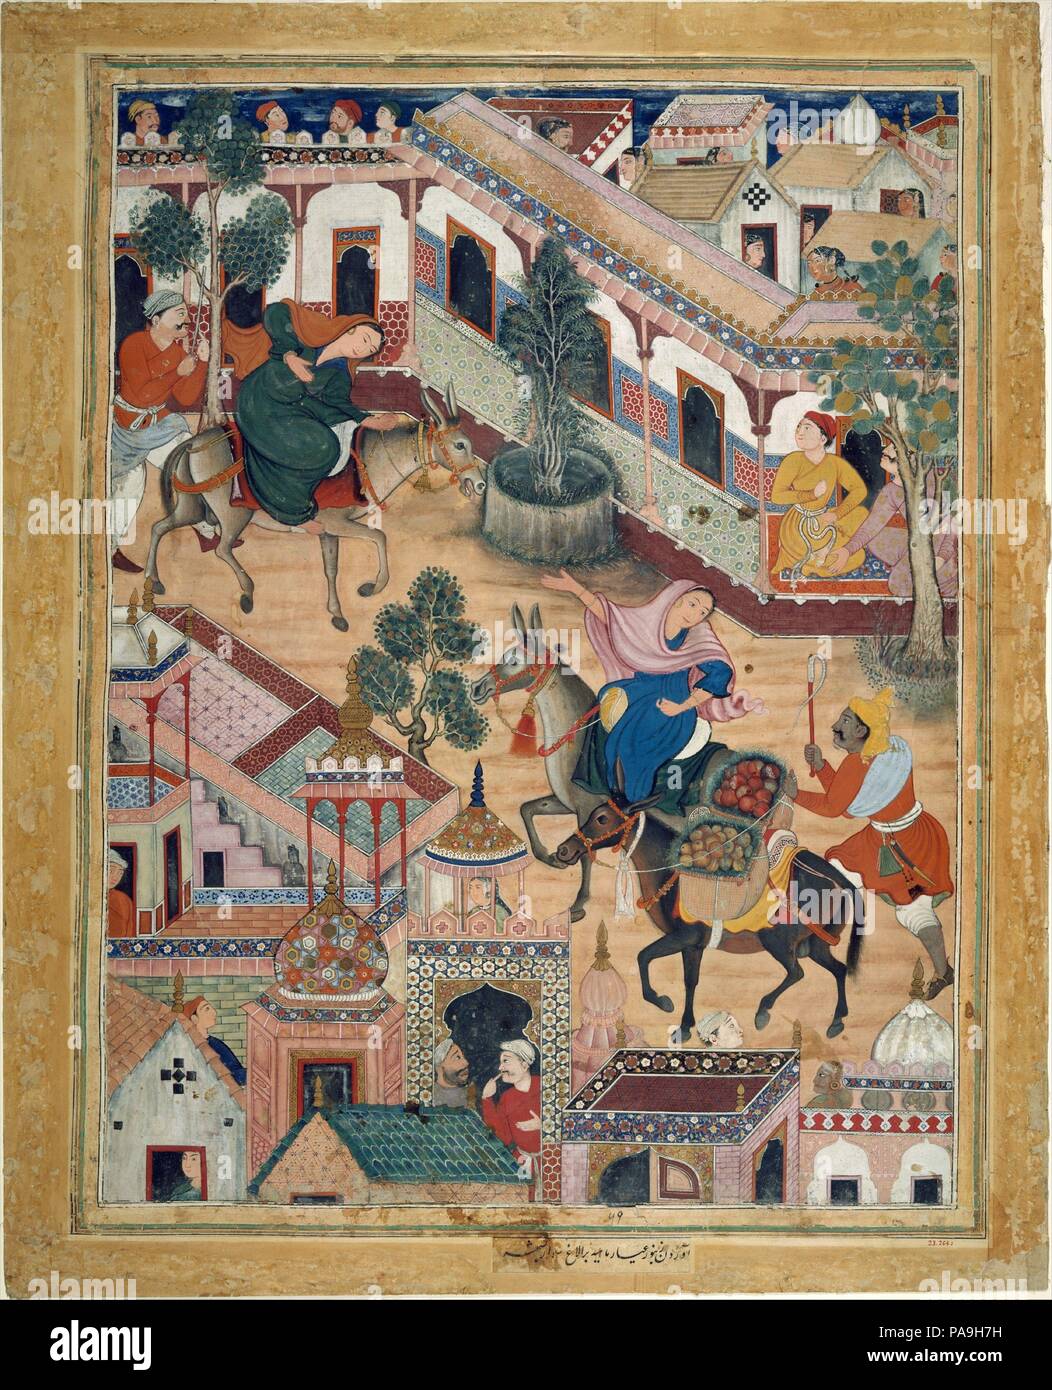 'The Spy Zambur Brings Mahiya to the City of Tawariq', Folio from a Hamzanama (Book of Hamza). Artist: Attributed to Kesav Das (active ca. 1570-1604); Attributed to Mah Muhammad (active 1570s). Dimensions: H. 29 1/8 in. (74 cm)  W. 22 1/2 in. (57.2 cm). Date: ca. 1570.  The <i>Hamzanama</i> tells the fantastic story of Hamza, an uncle of the Prophet, who traveled the world spreading the teachings of Islam. The story was a popular subject for public recitation in coffeehouses, so exciting and full of fantastic elements were the tales. The young emperor Akbar commissioned an illustrated version  Stock Photo